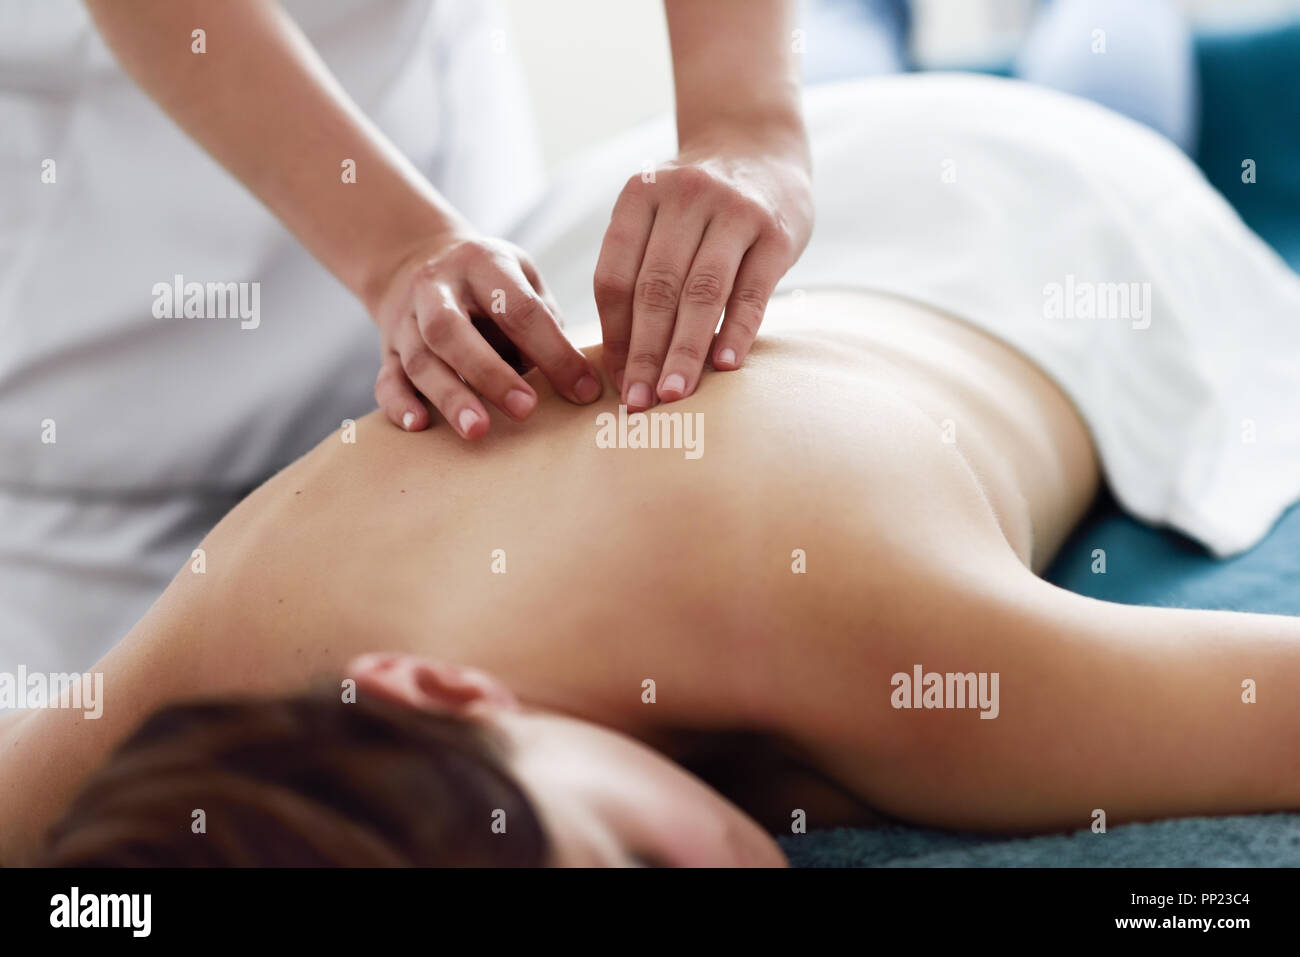 Young woman receiving a back massage by professional therapist. Female patient is receiving treatment in a spa center. Stock Photo